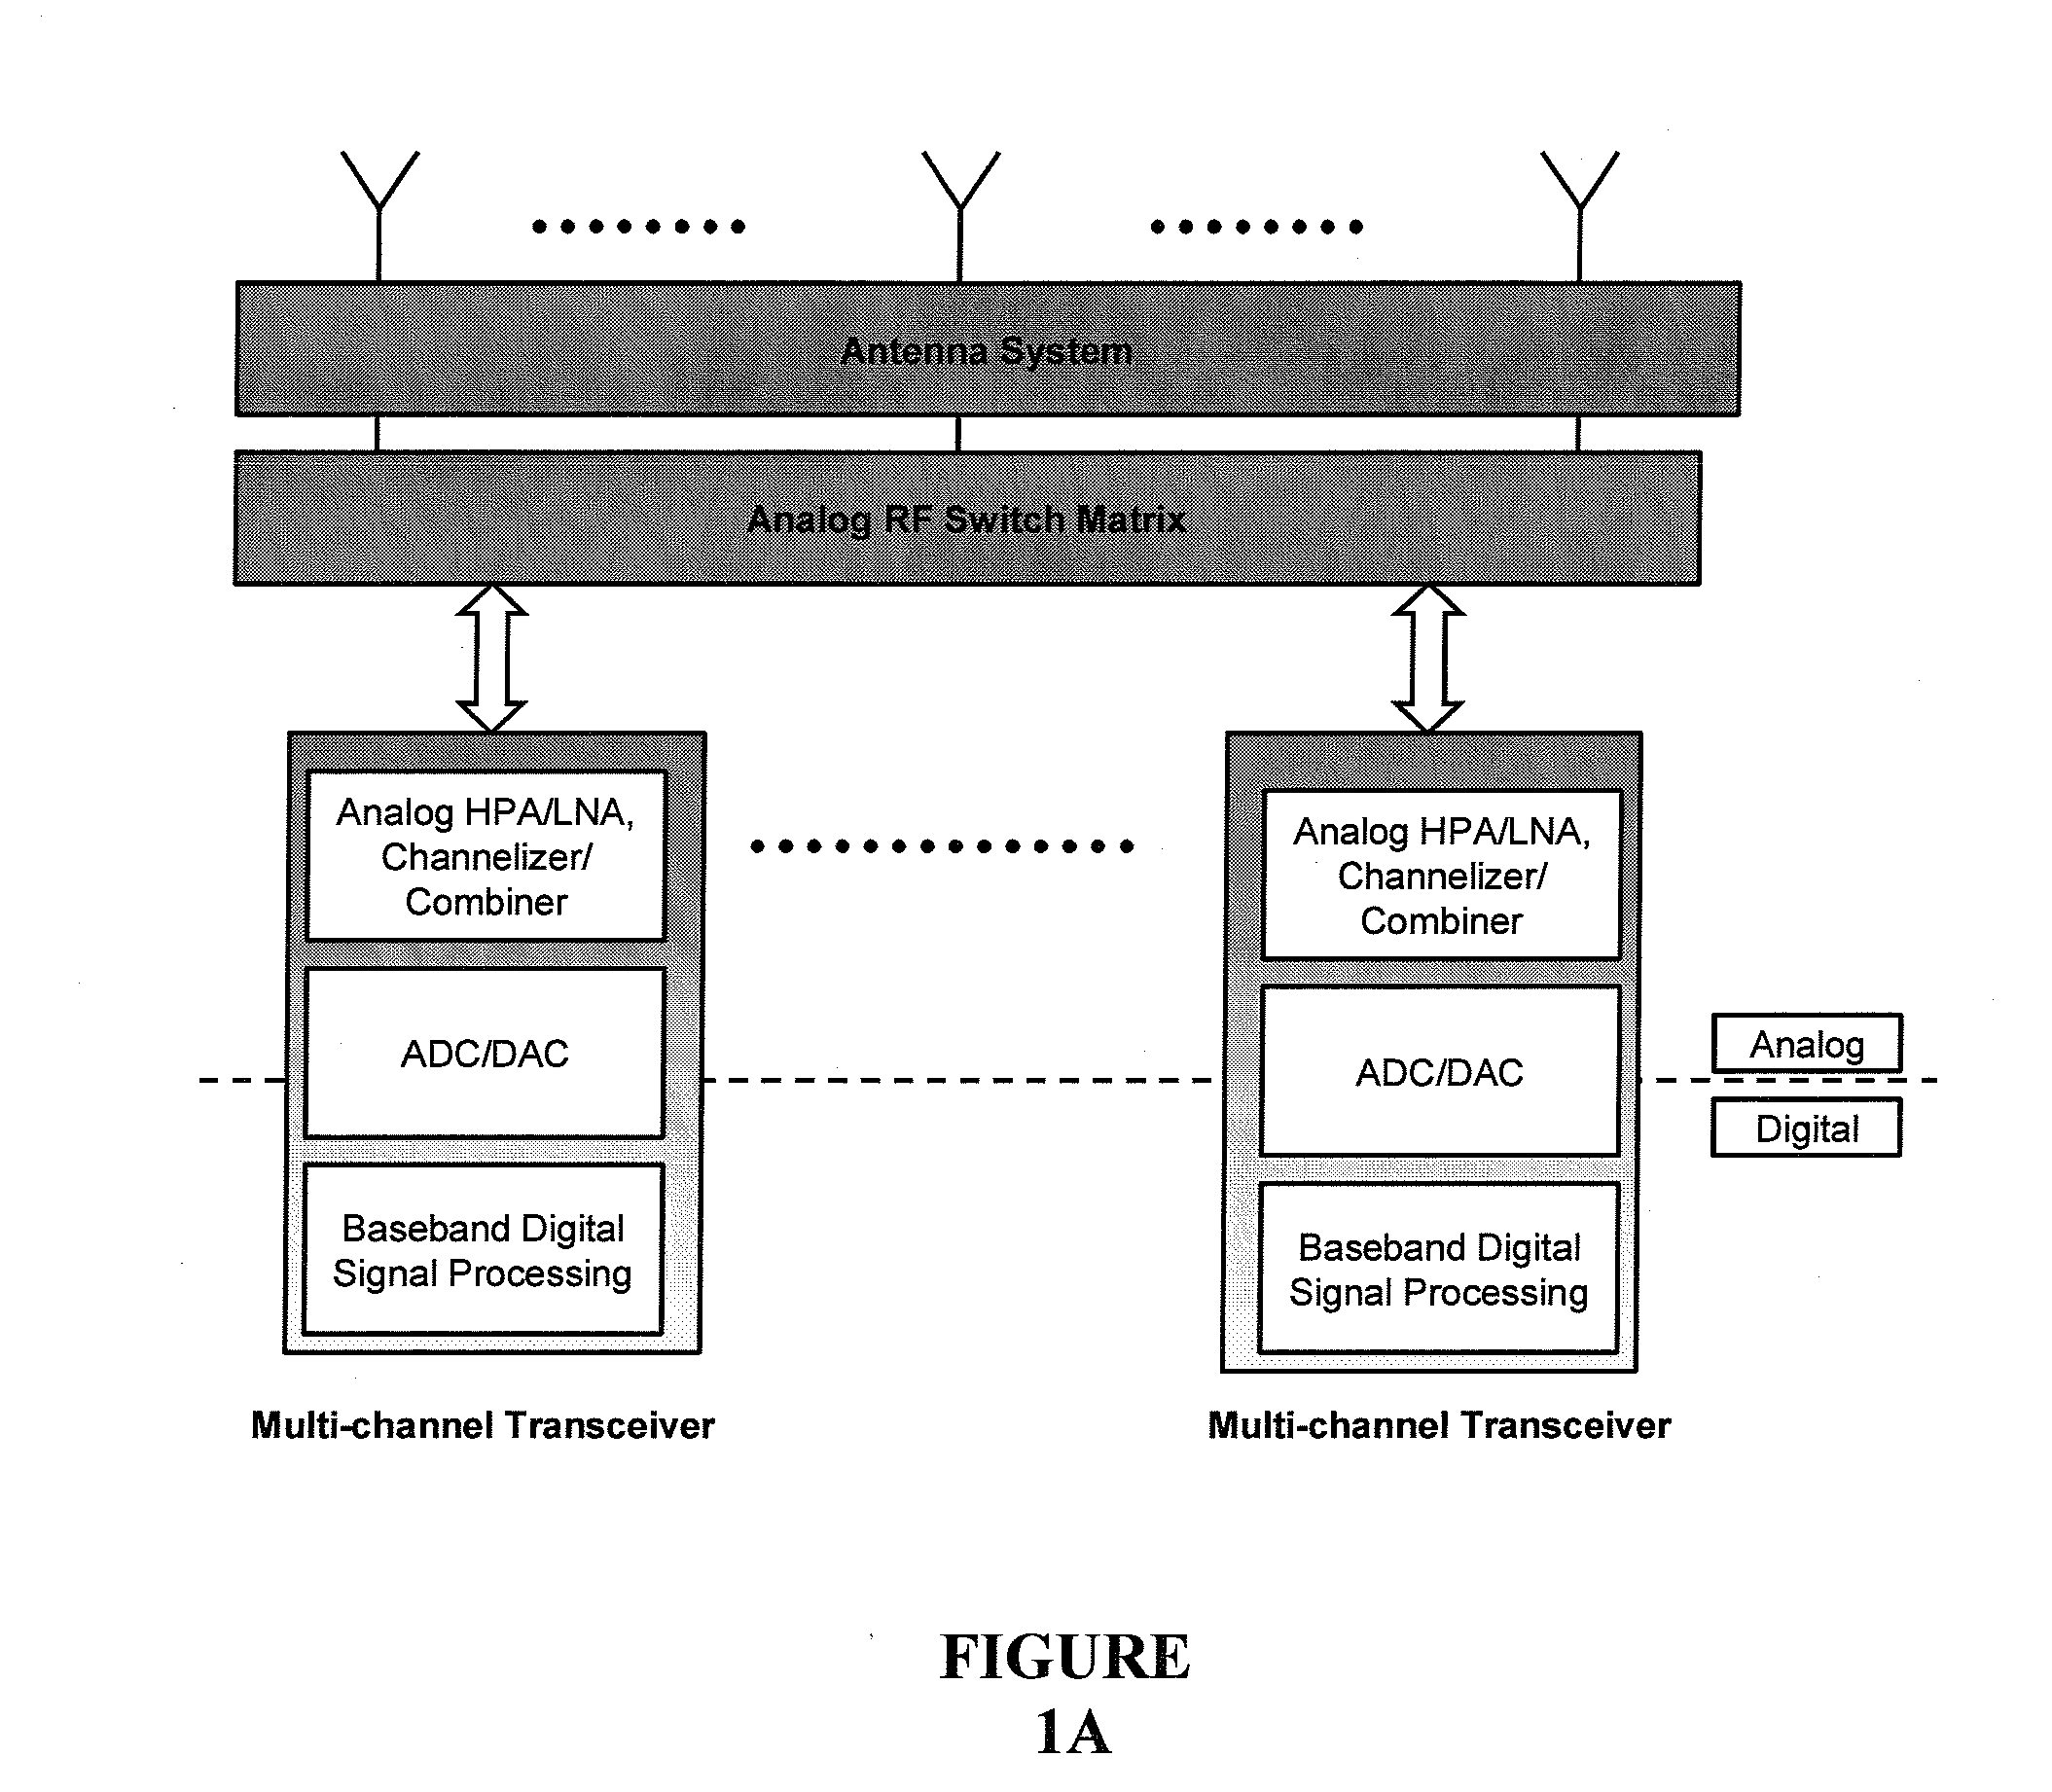 Digital Routing Switch Matrix for Digitized Radio-Frequency Signals